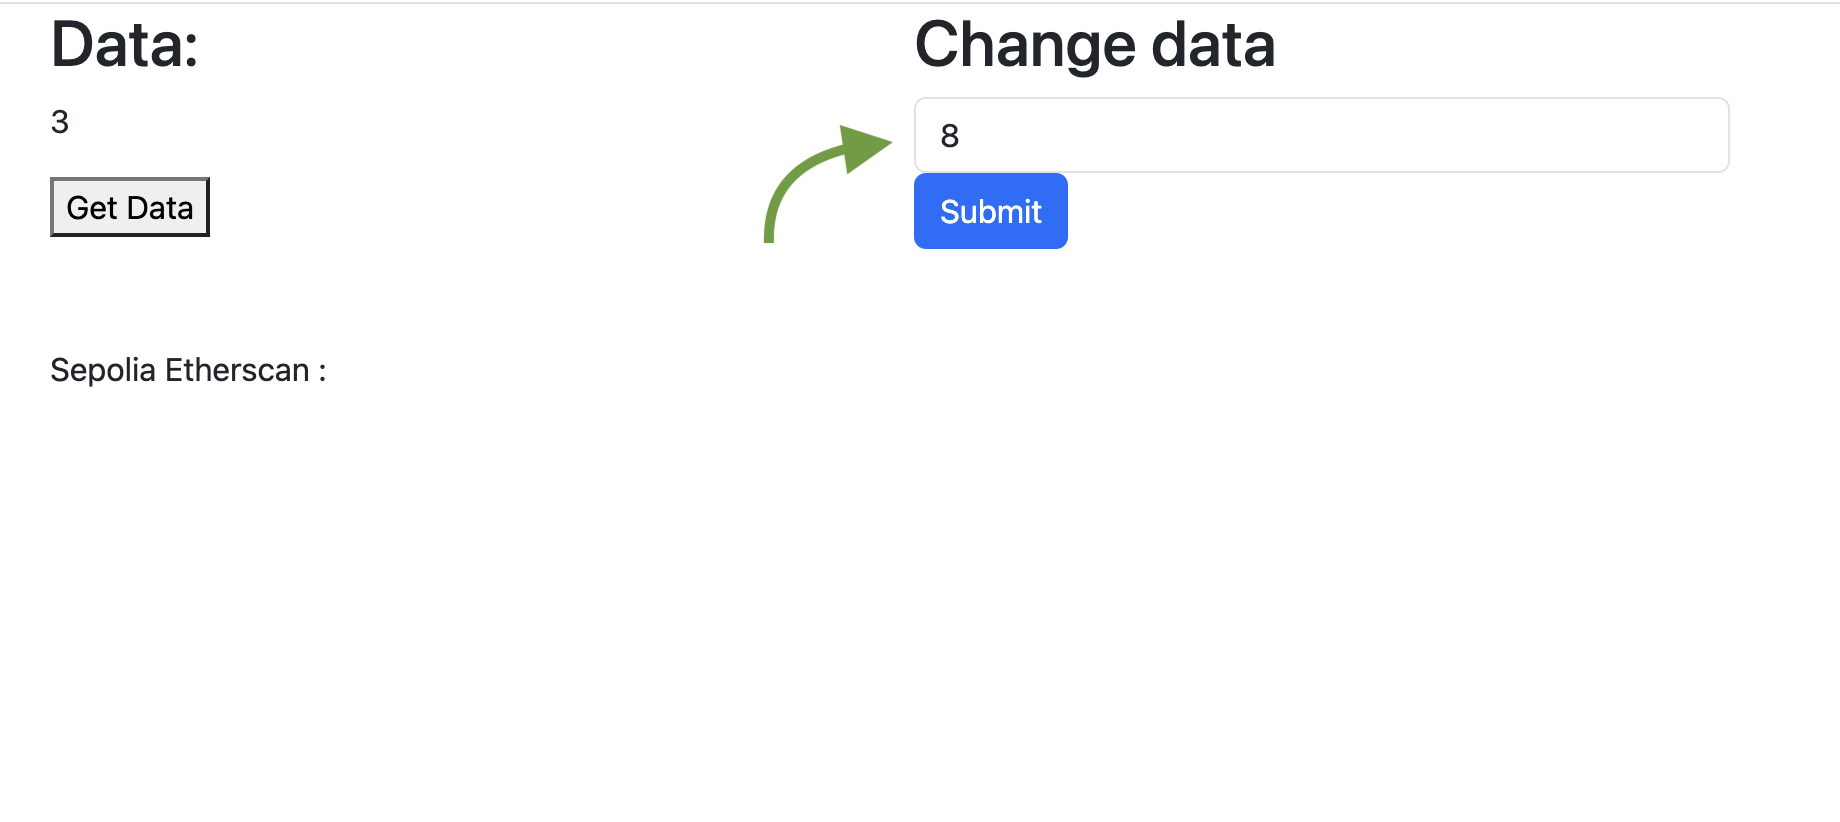 Change data from a smart contract